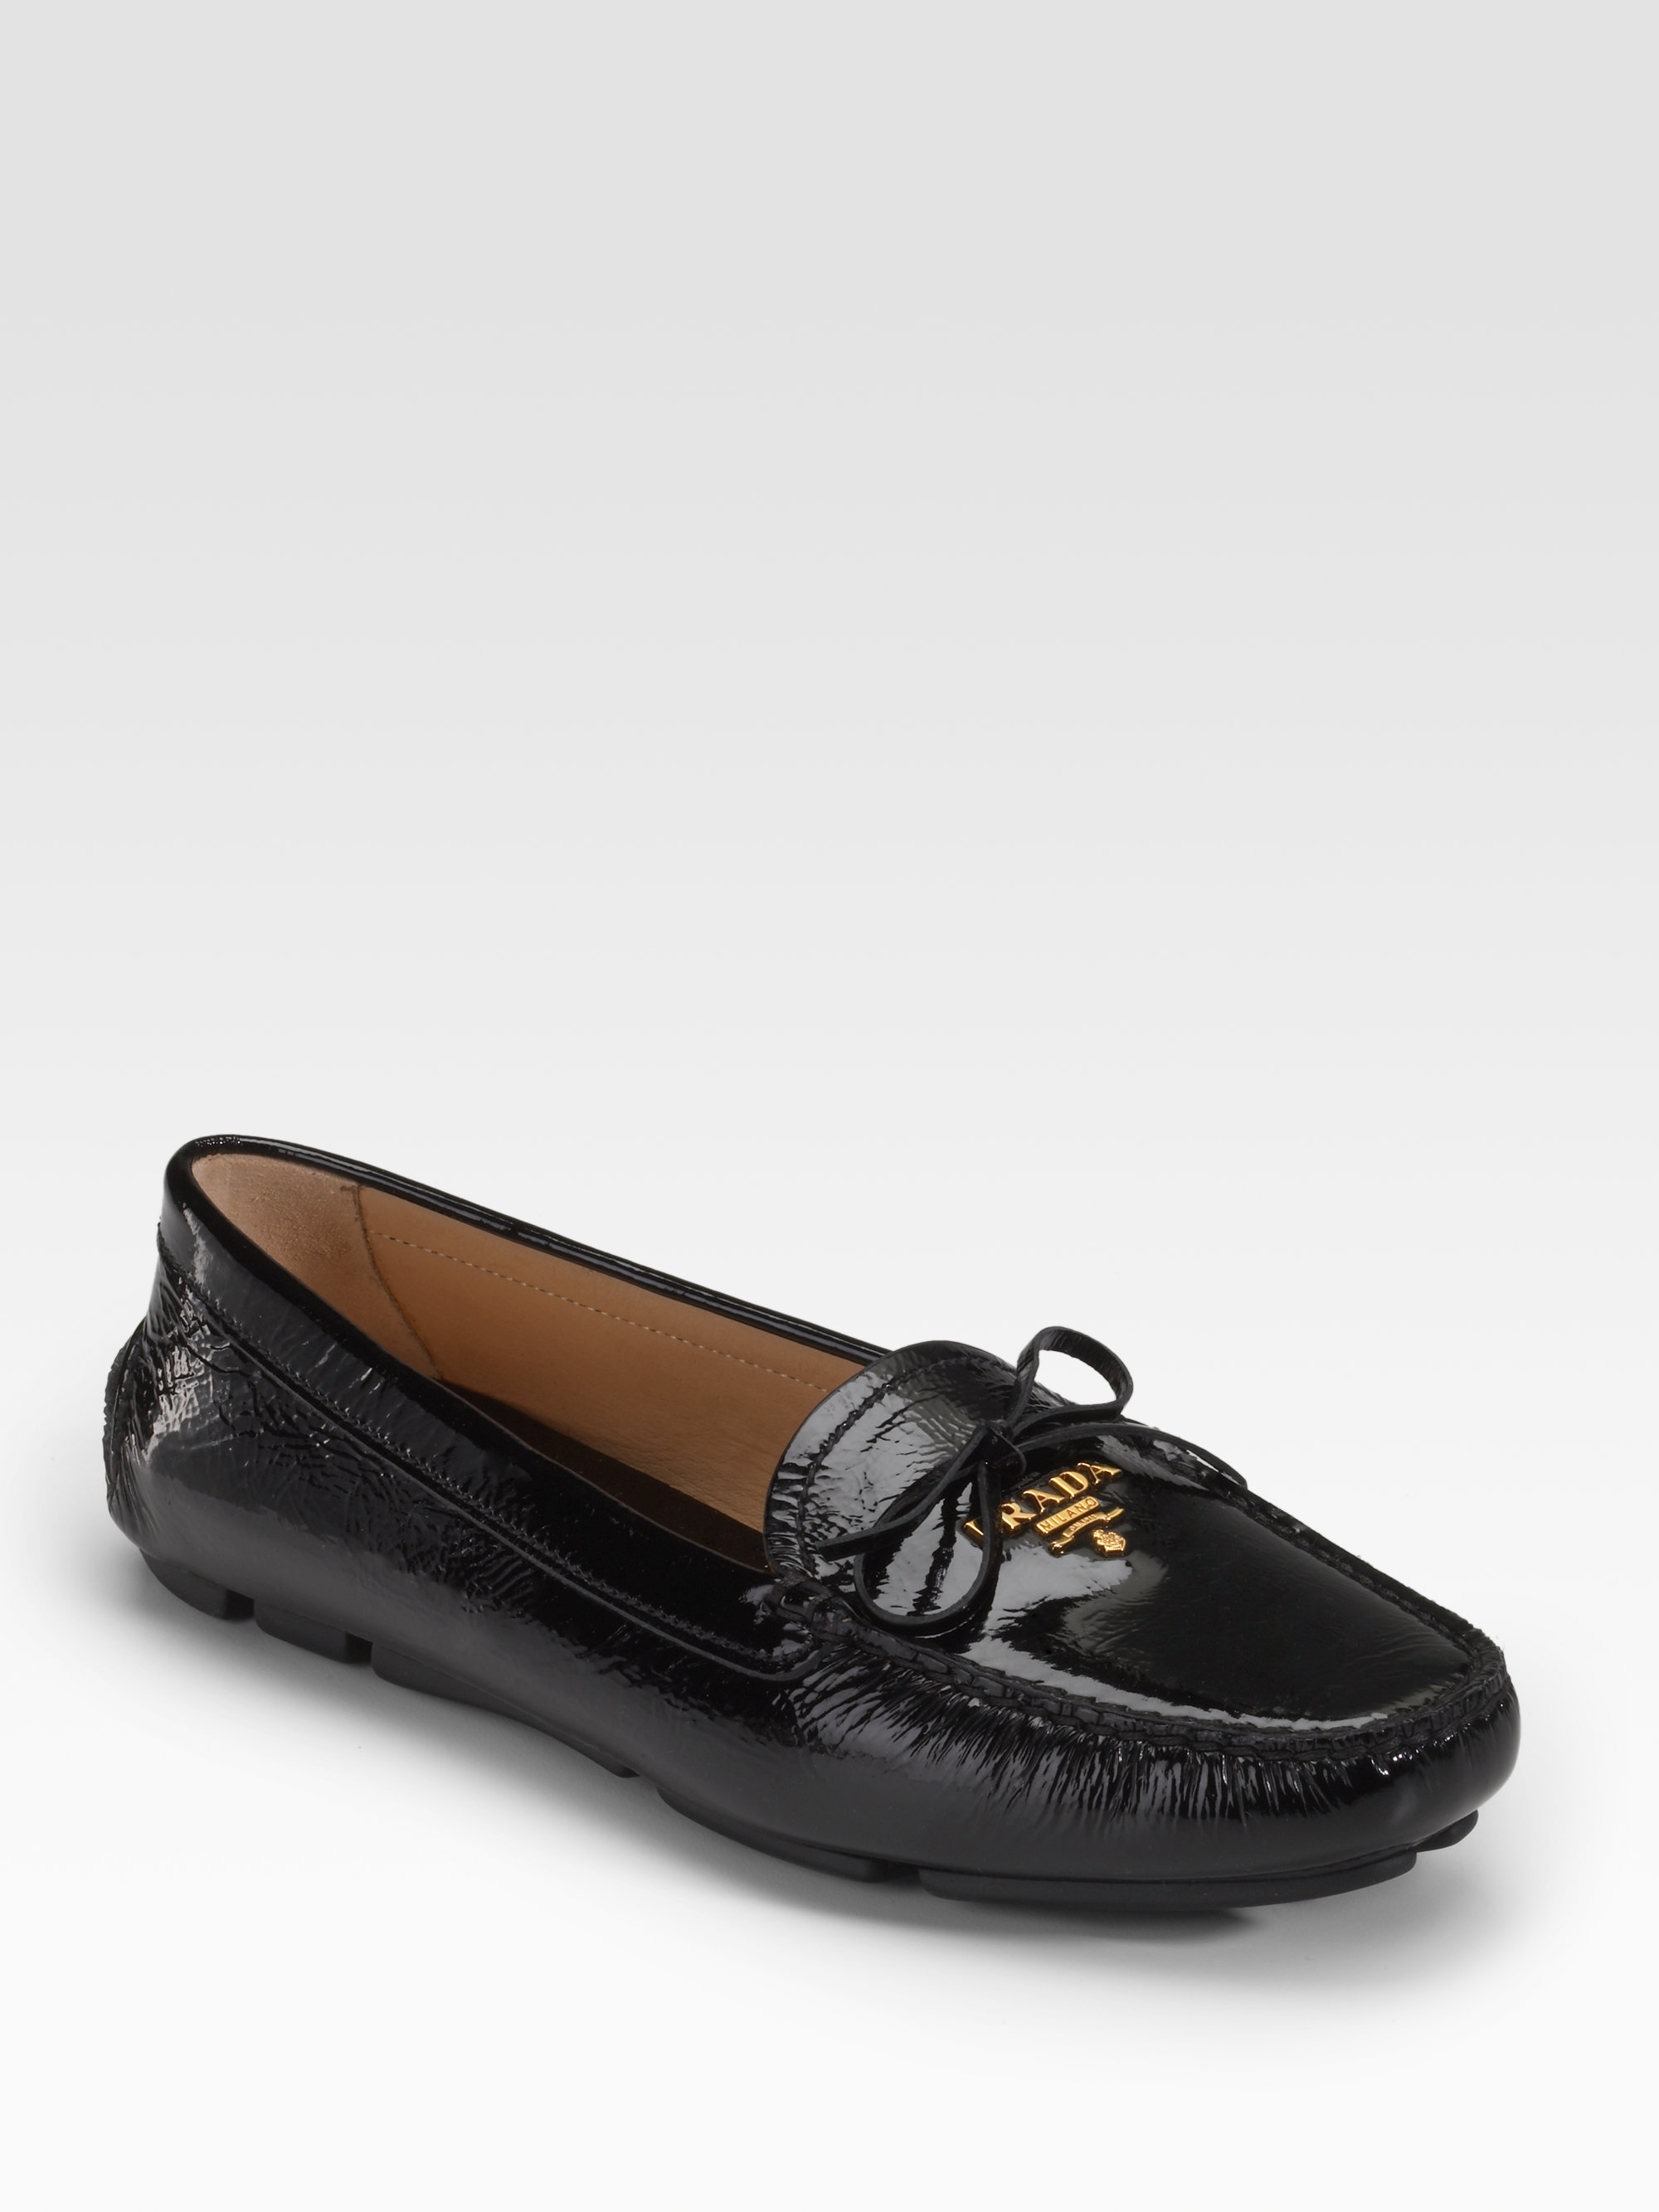 Prada Patent Leather Moccasins in Red 